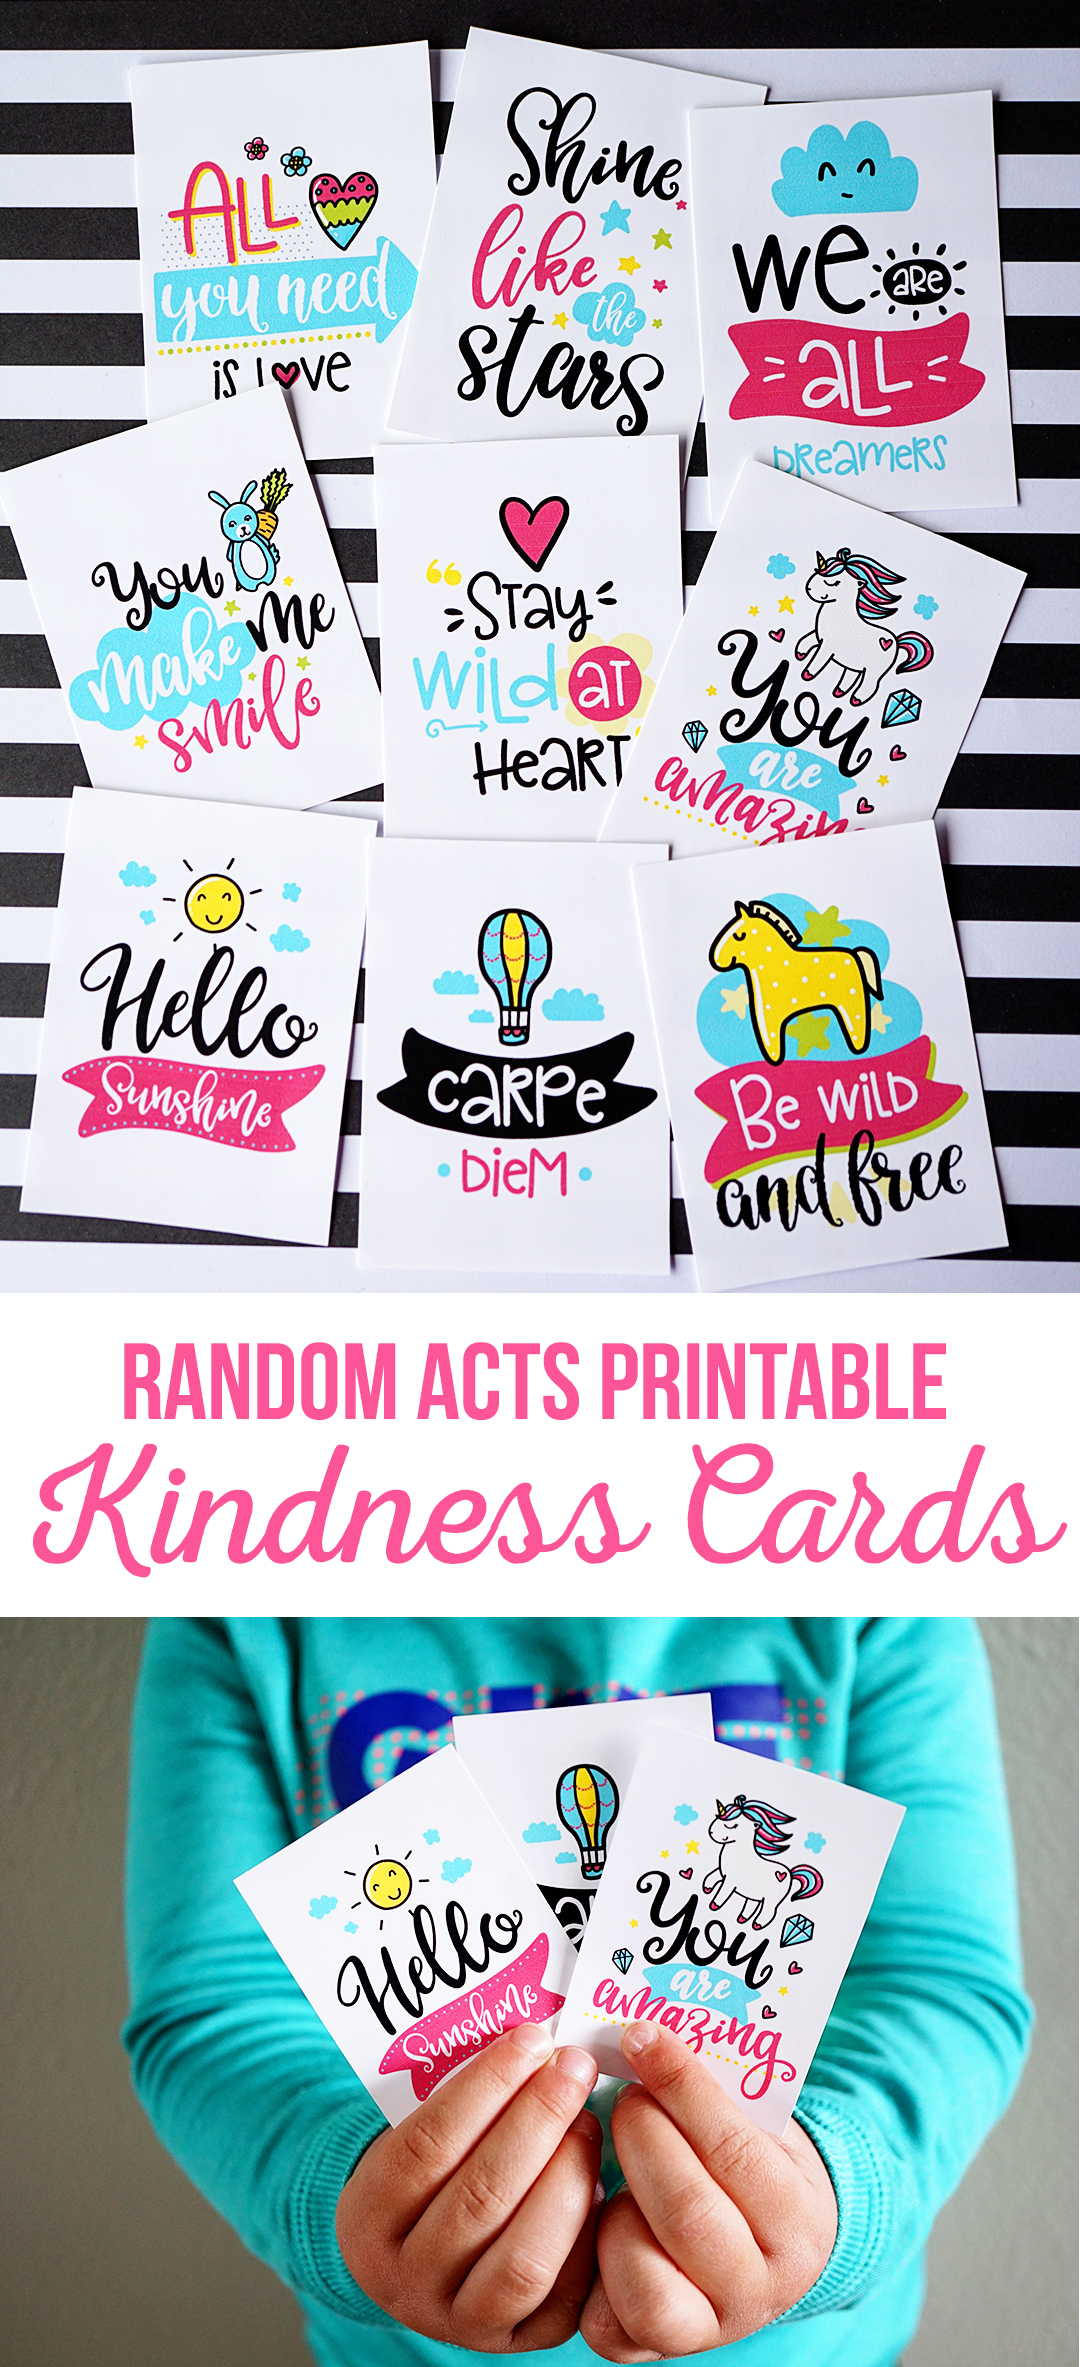 Random Acts Printable Kindness Cards - The Crafting Chicks Within Random Acts Of Kindness Cards Templates